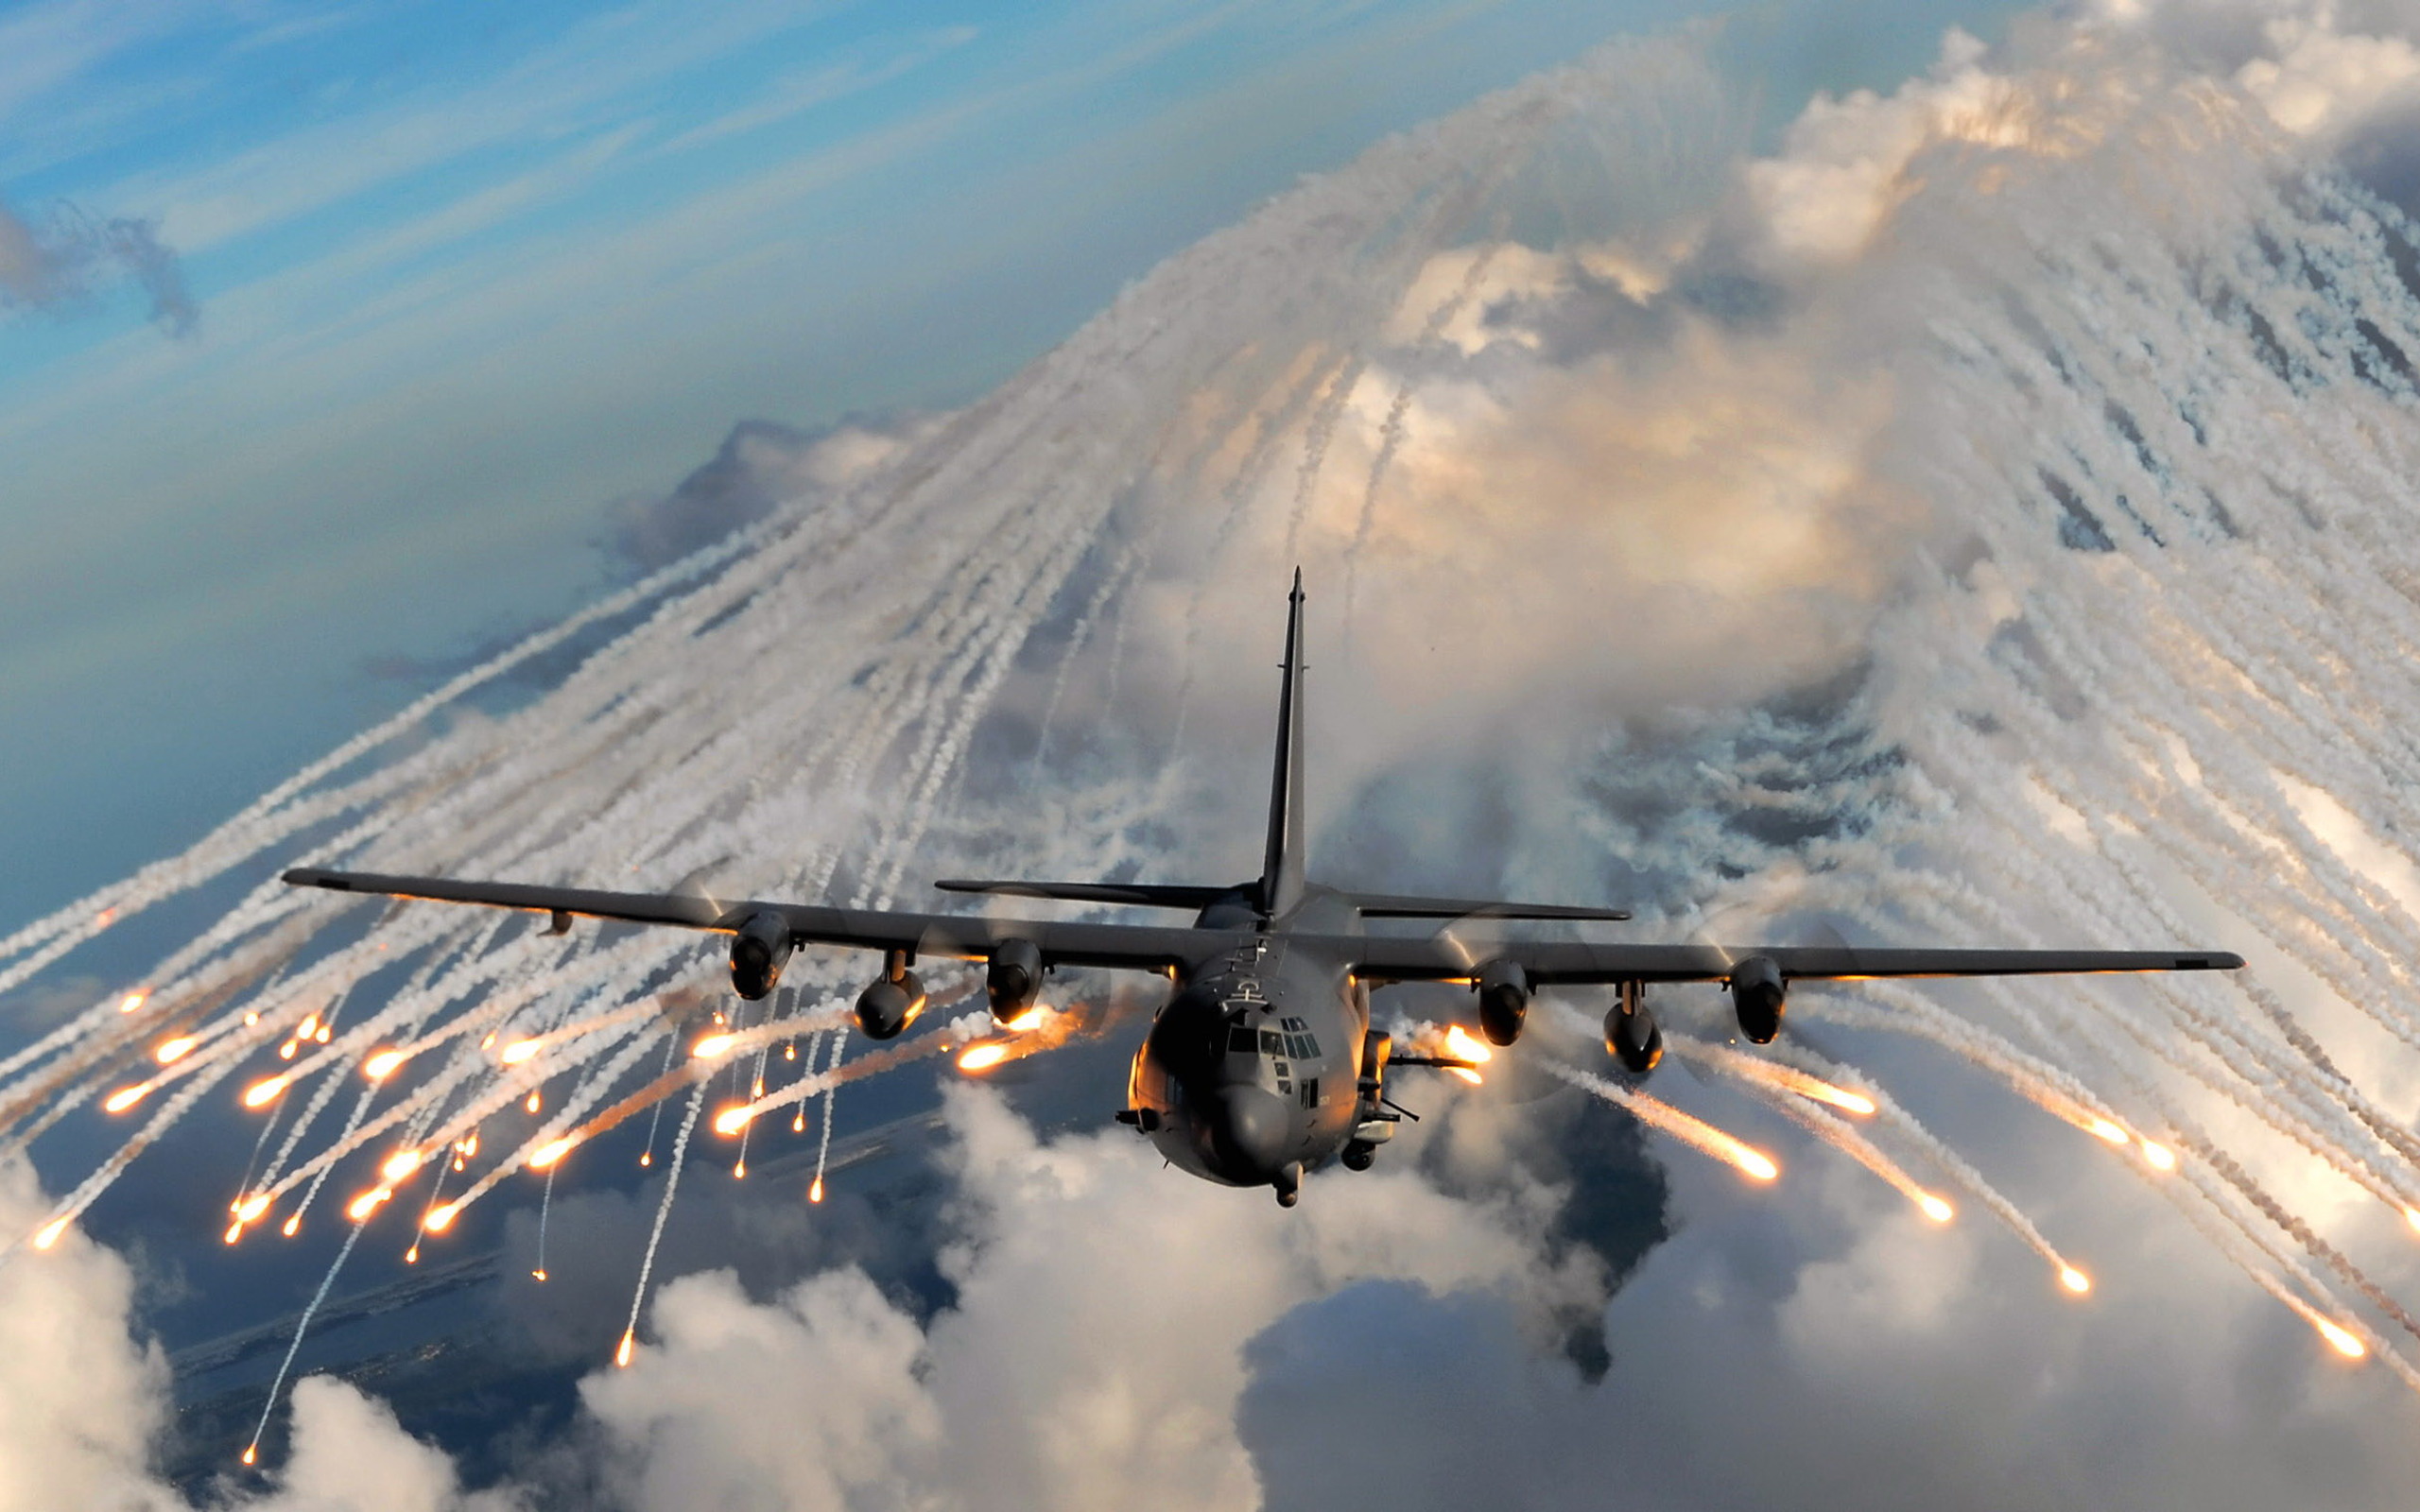 C 130 Hercules wallpapers and images - wallpapers, pictures, photos